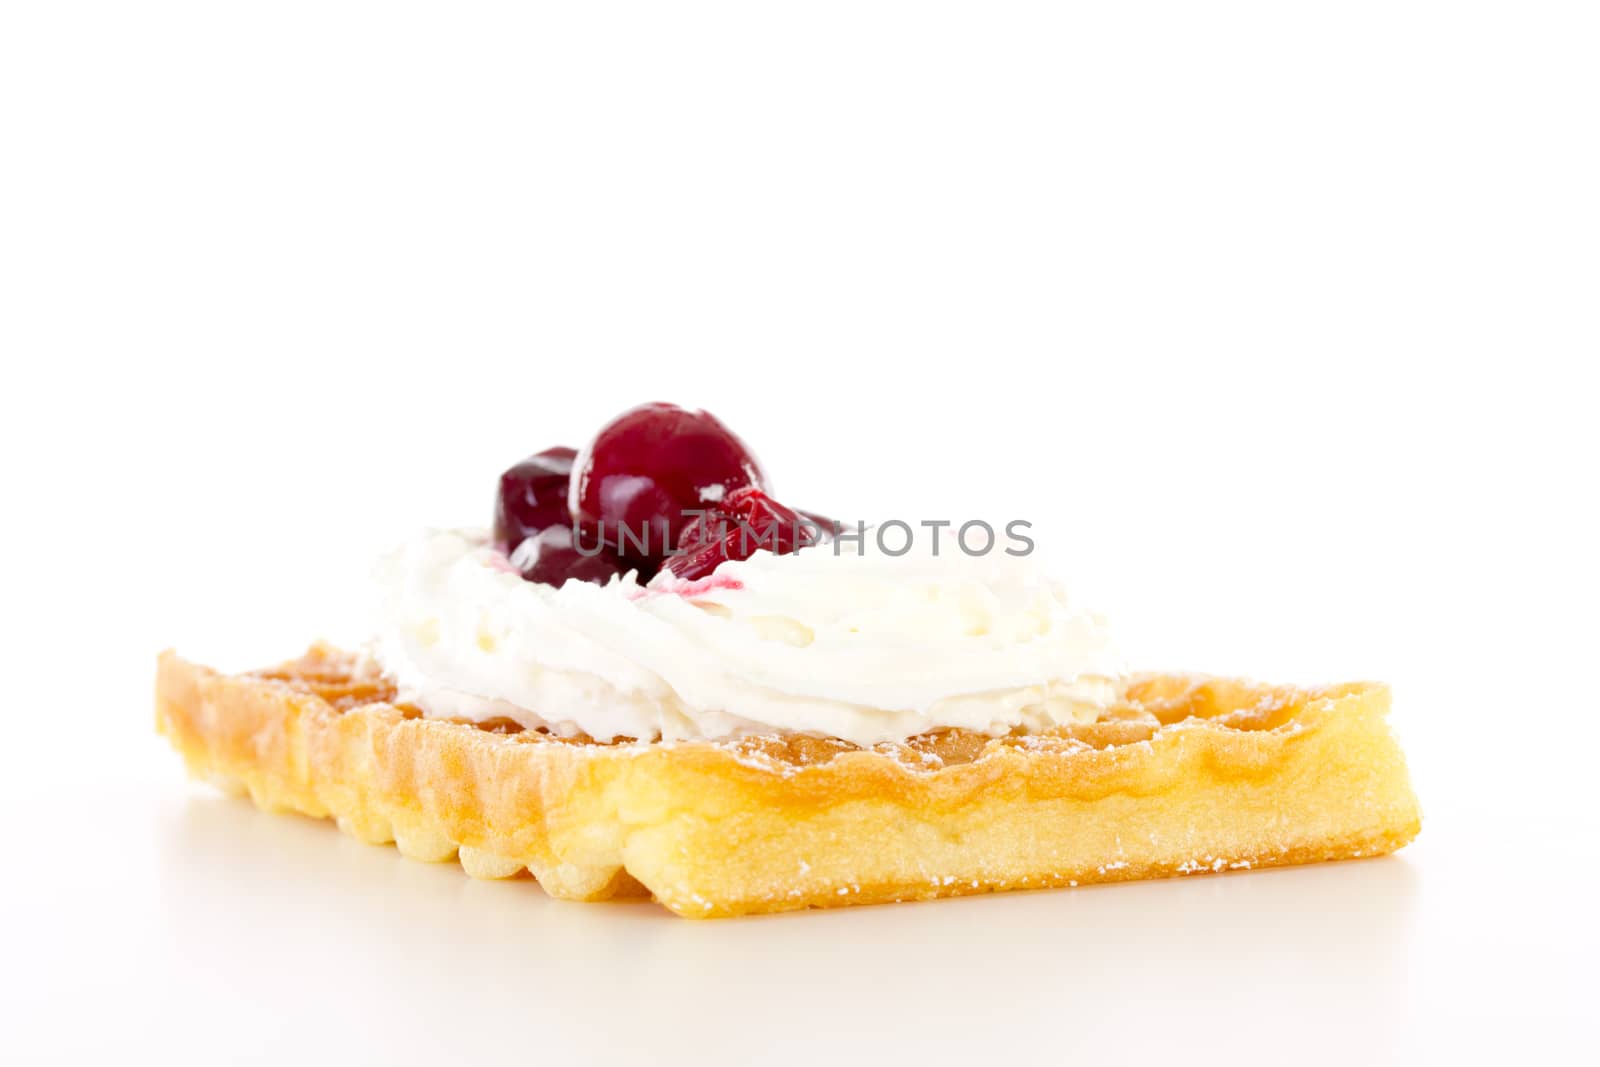 Brussels waffle with whipping cream and sour cherries by gwolters